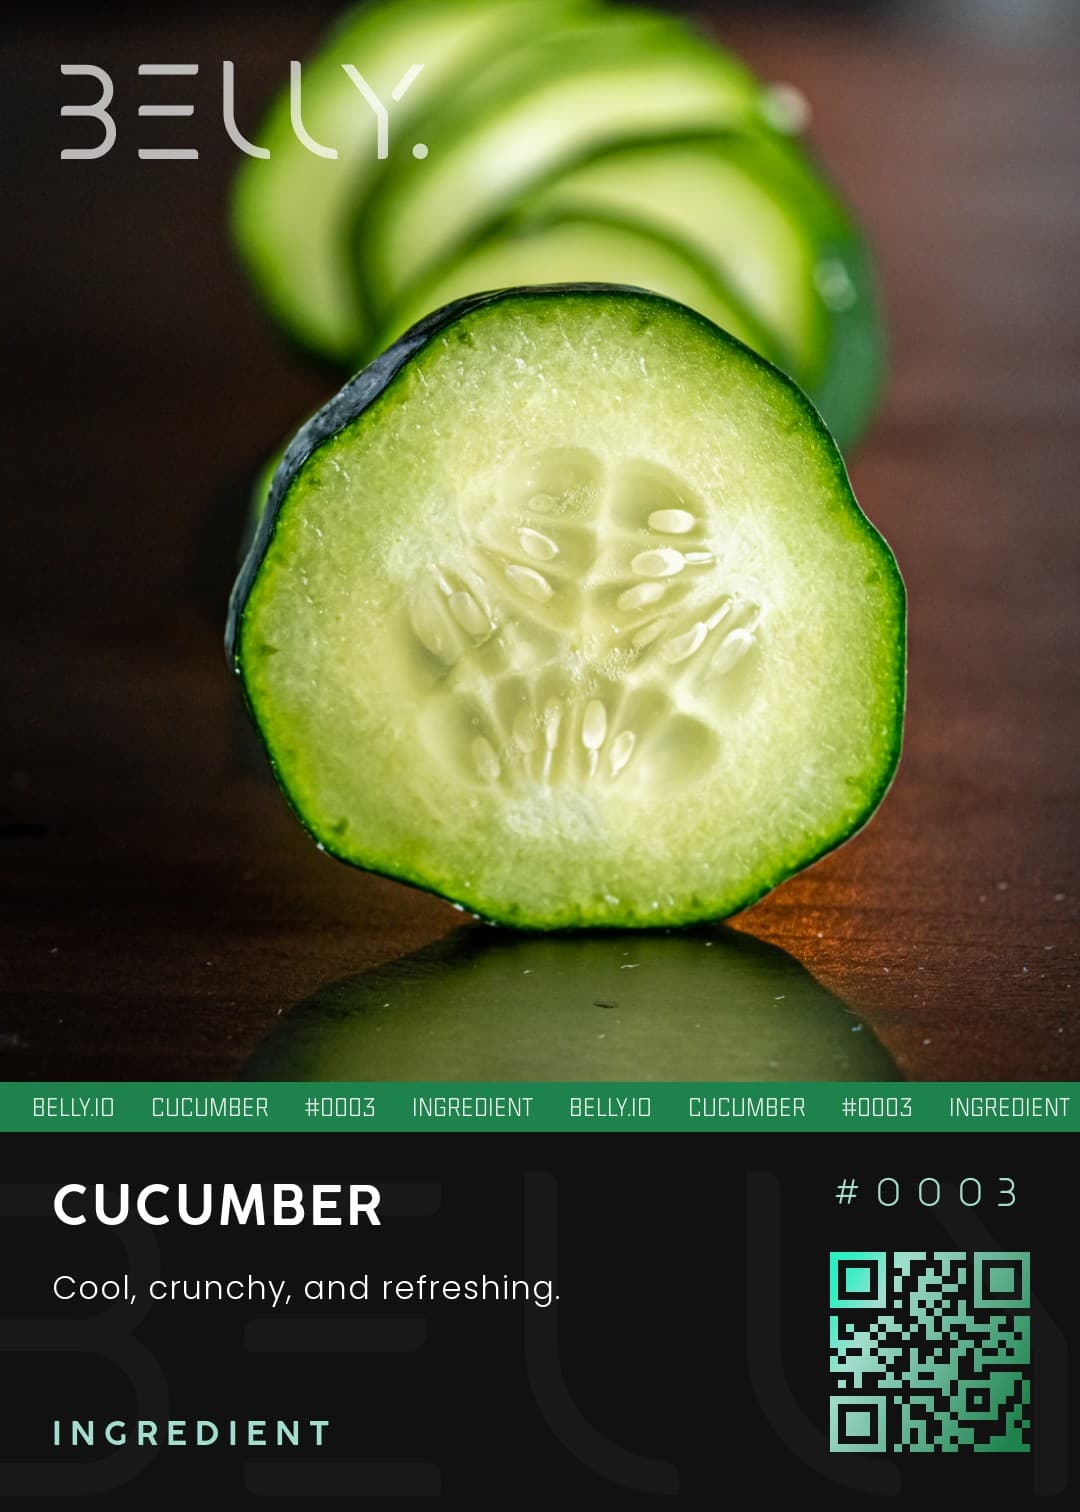 Cucumber - Cool, crunchy, and refreshing.